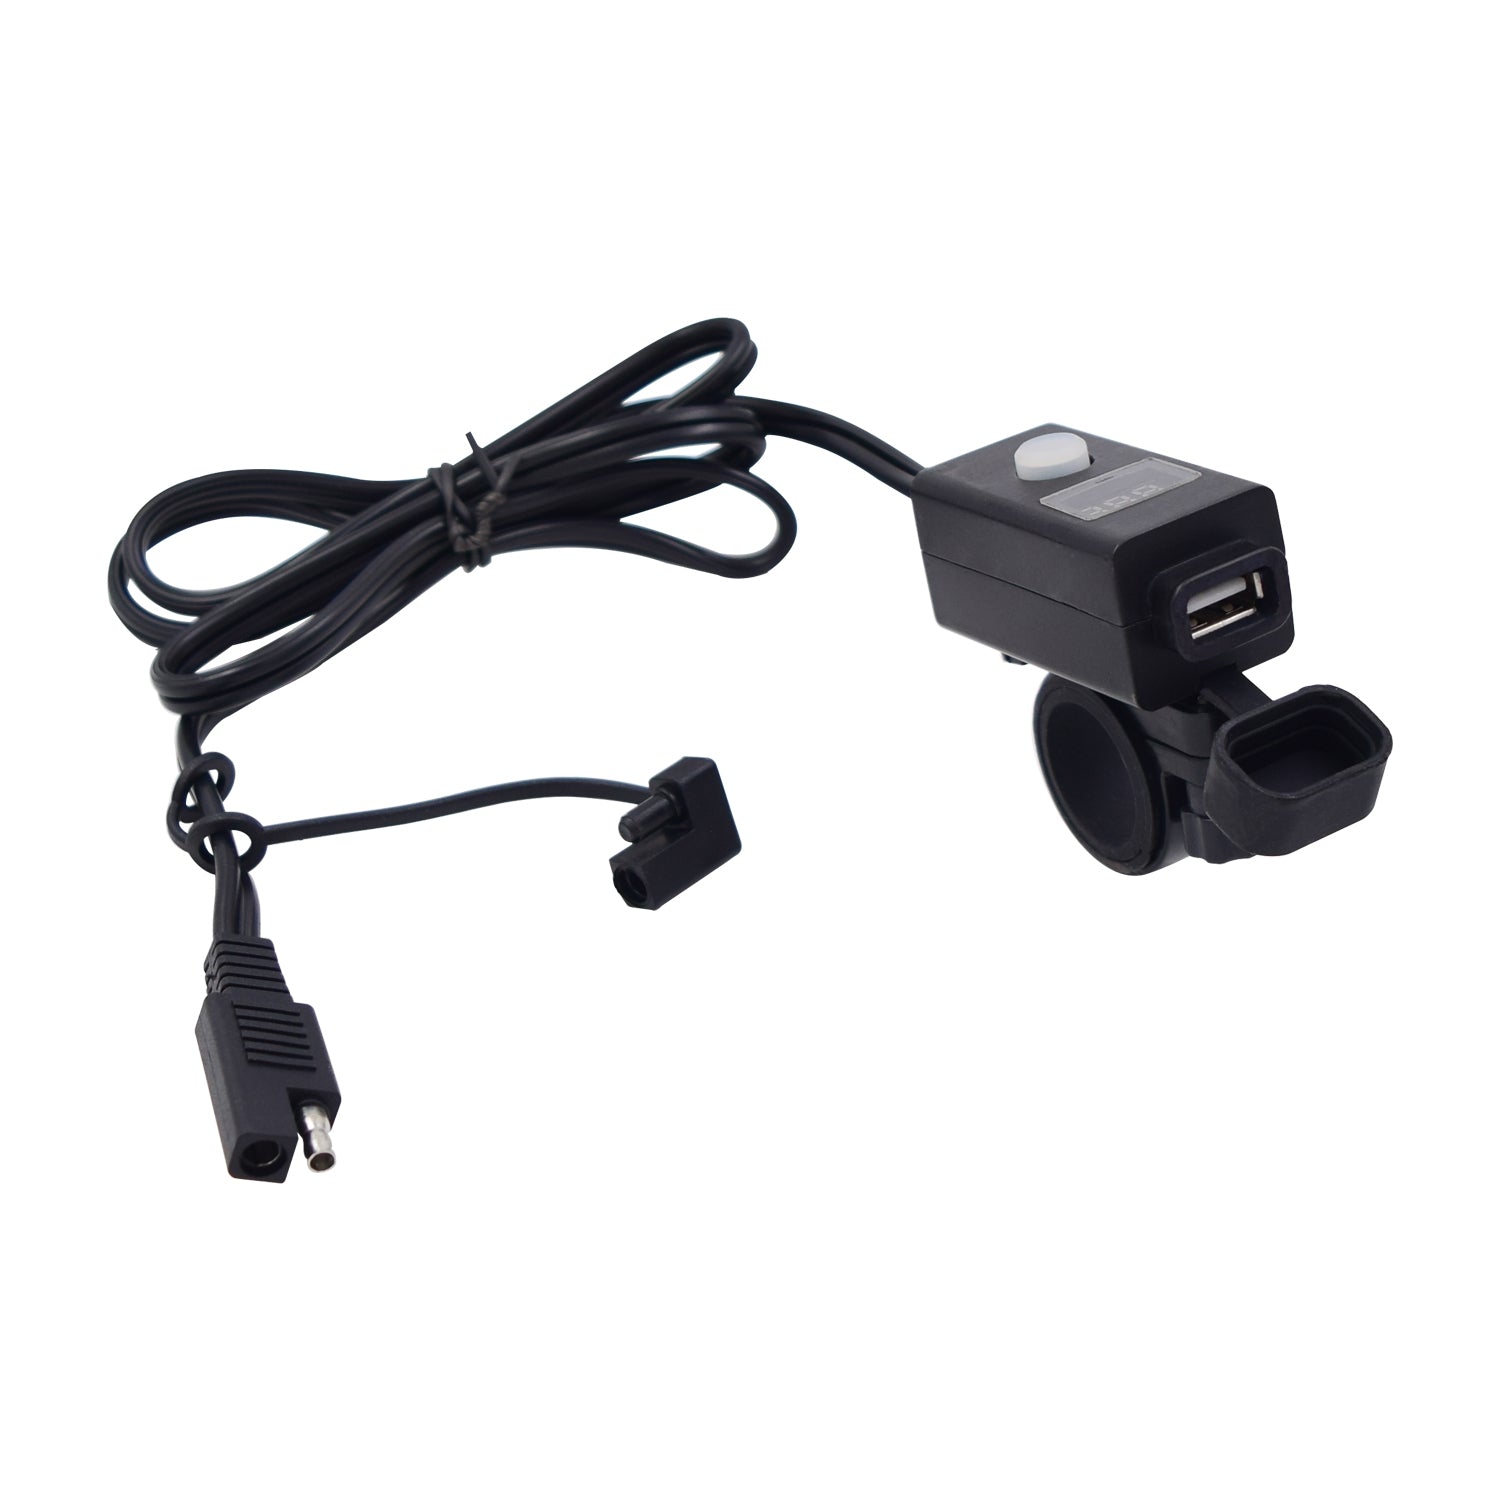 Creative USB Motorcycle Bike Charger with LED Light for Phones / GPS